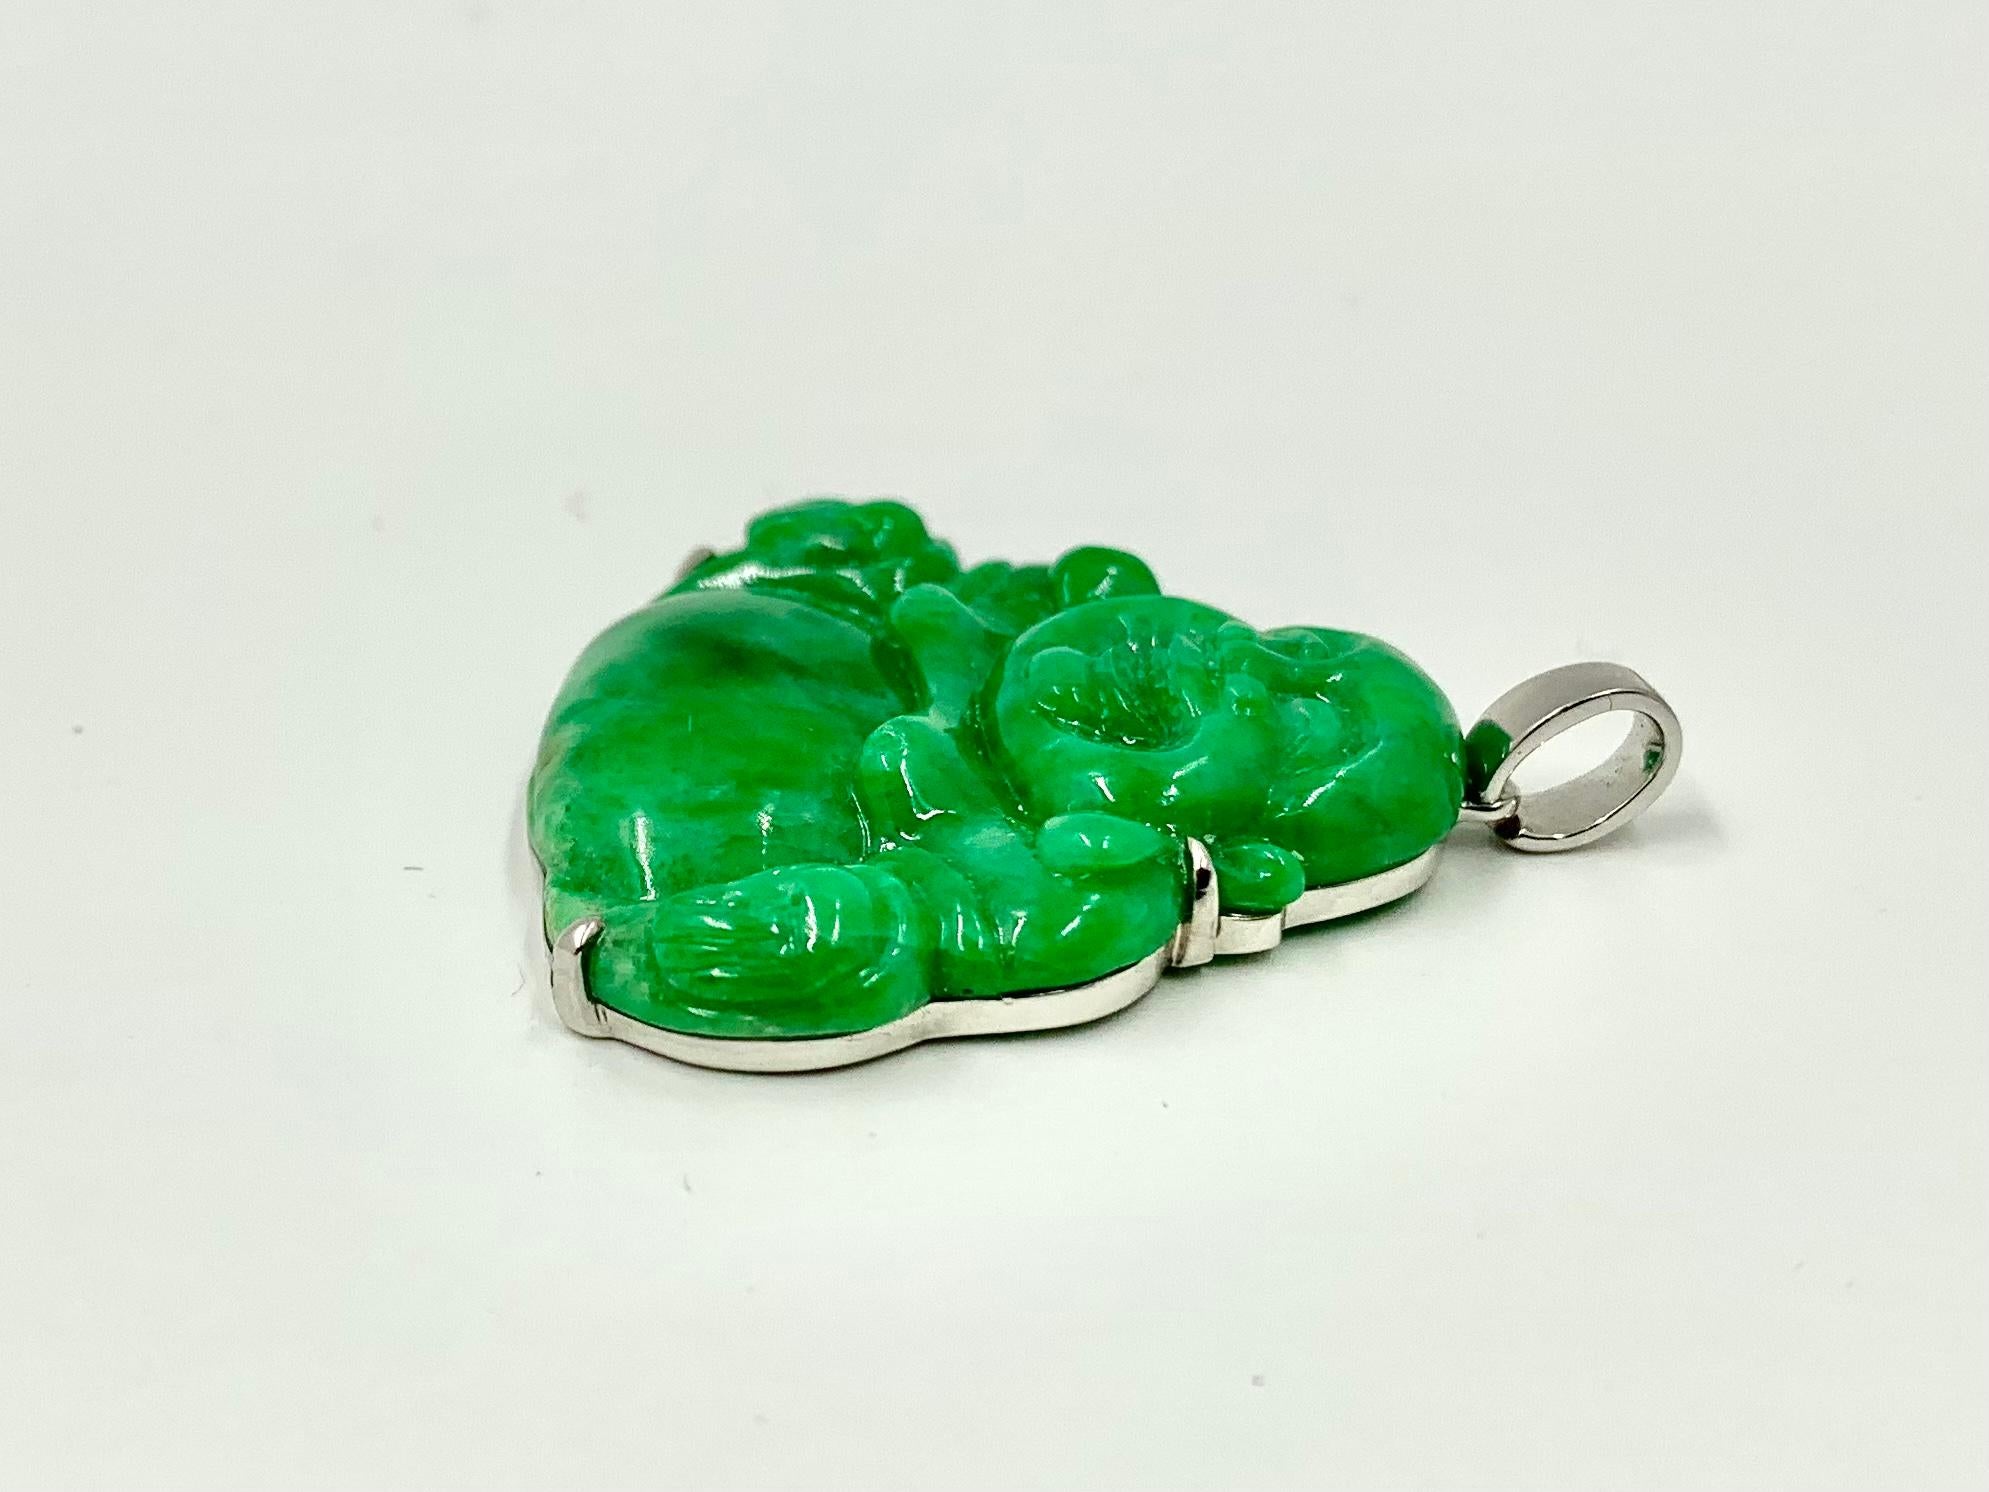 Certified Natural Color Fei Cui Type A Apple Green Jade Laughing Buddha Pendant For Sale 2